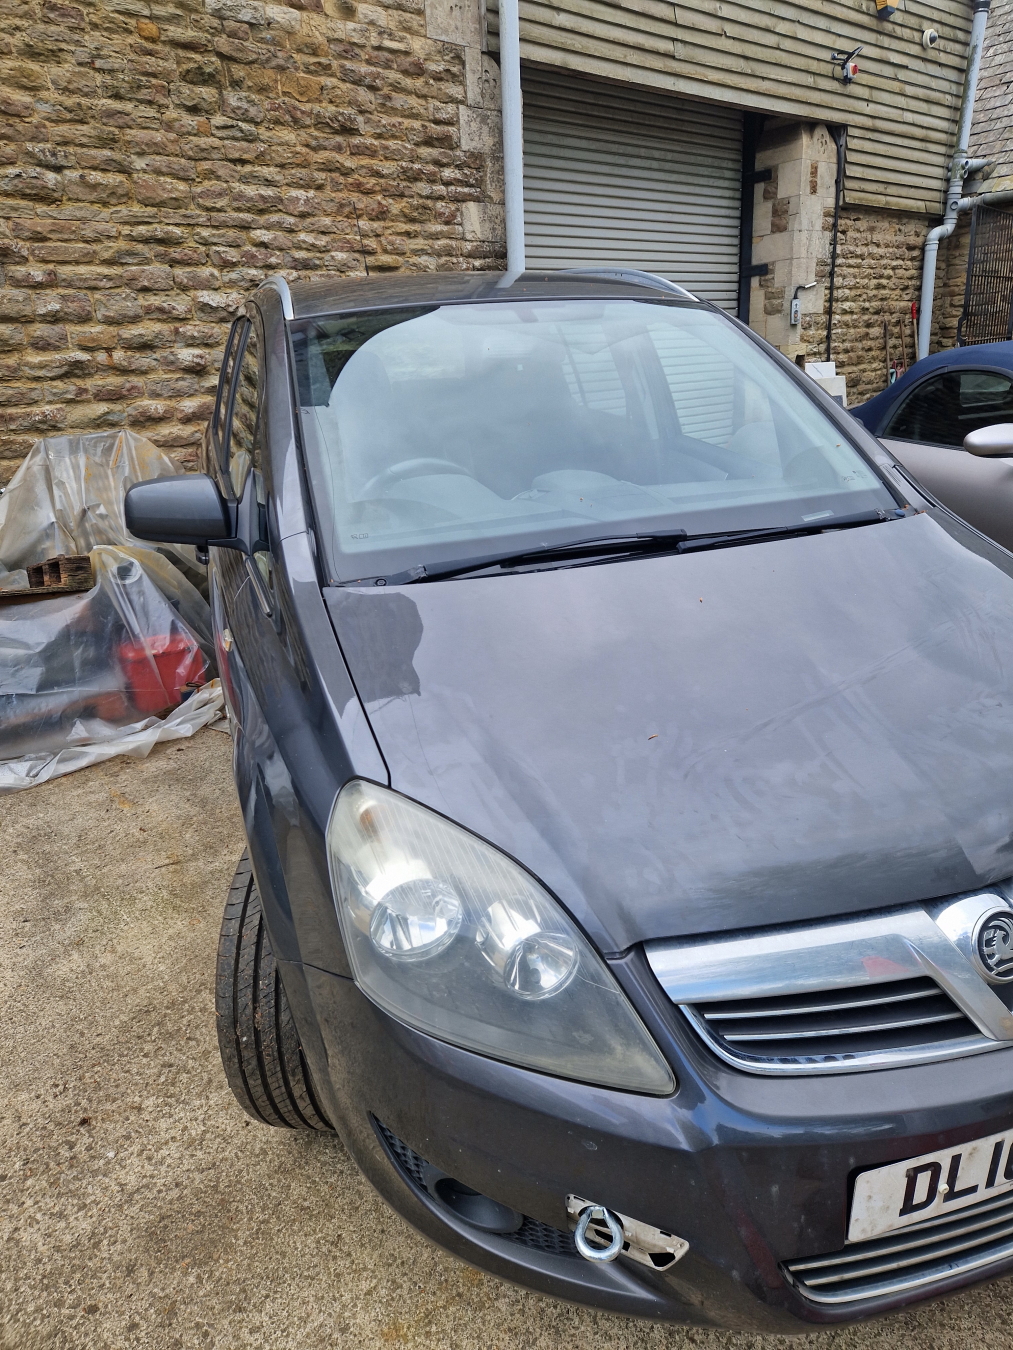 A 2010 VAUXHALL ZAFIRA 1.8 PETROL FOR SPARES OR REPAIRS (NON RUNNER) WITH 2 MONTHS MOT. - Image 2 of 7